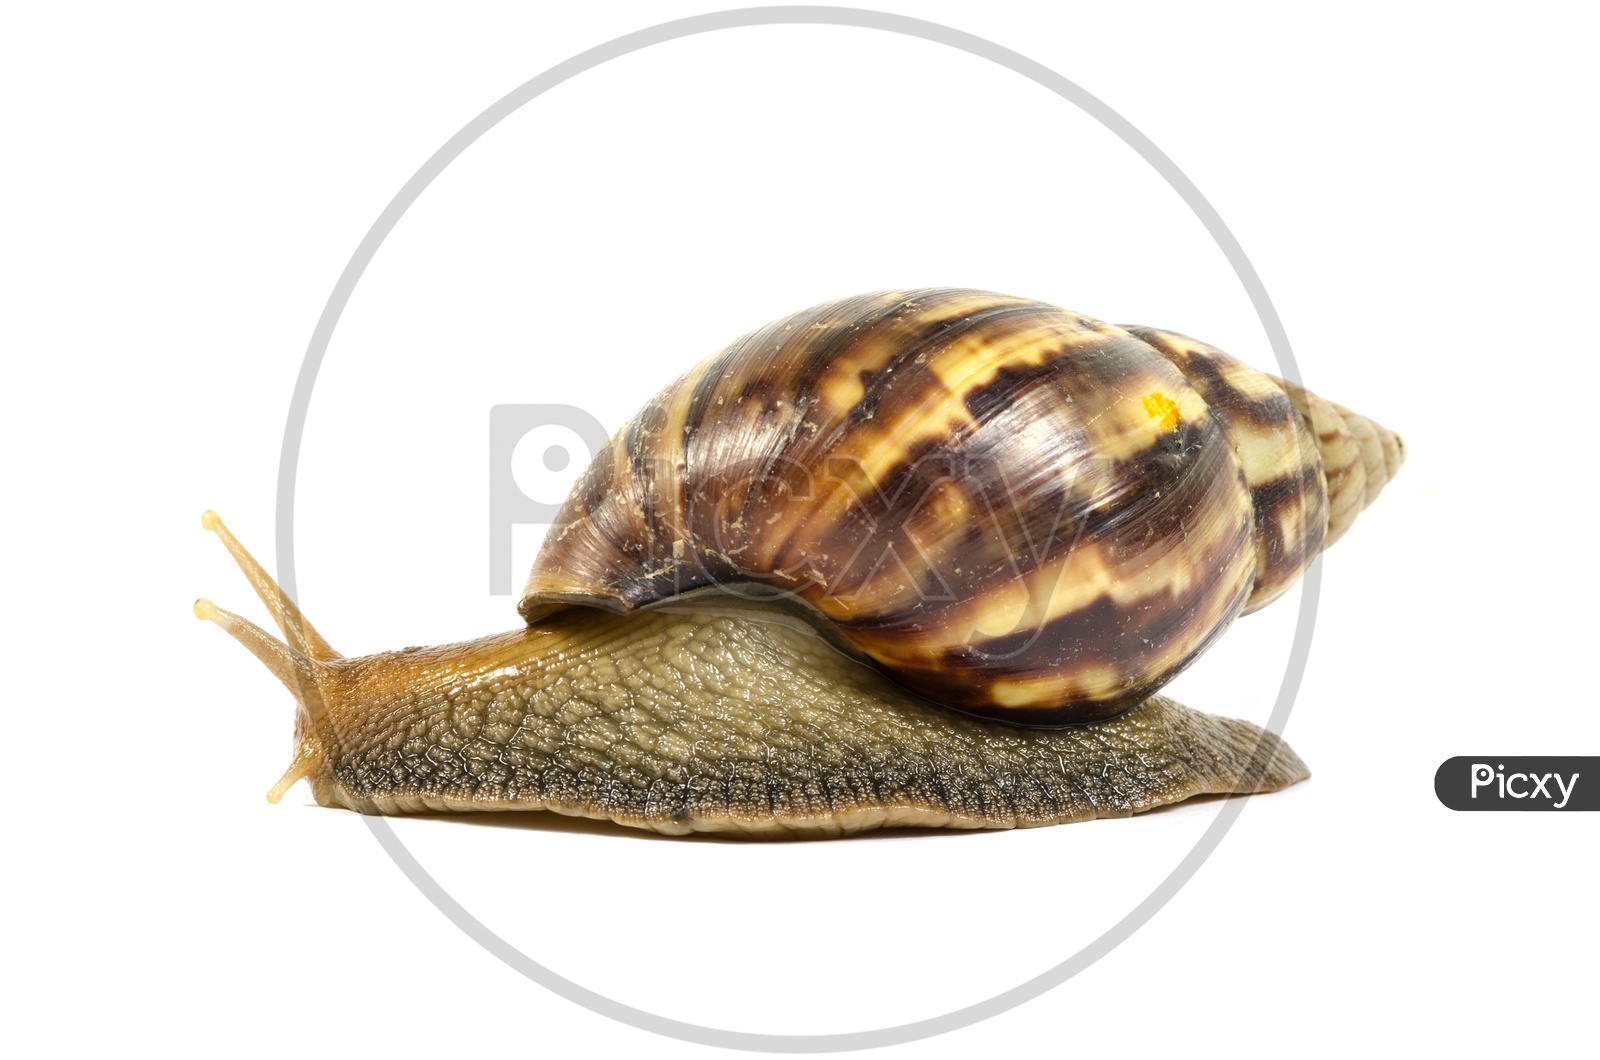 View of Garden snail isolated on white background.